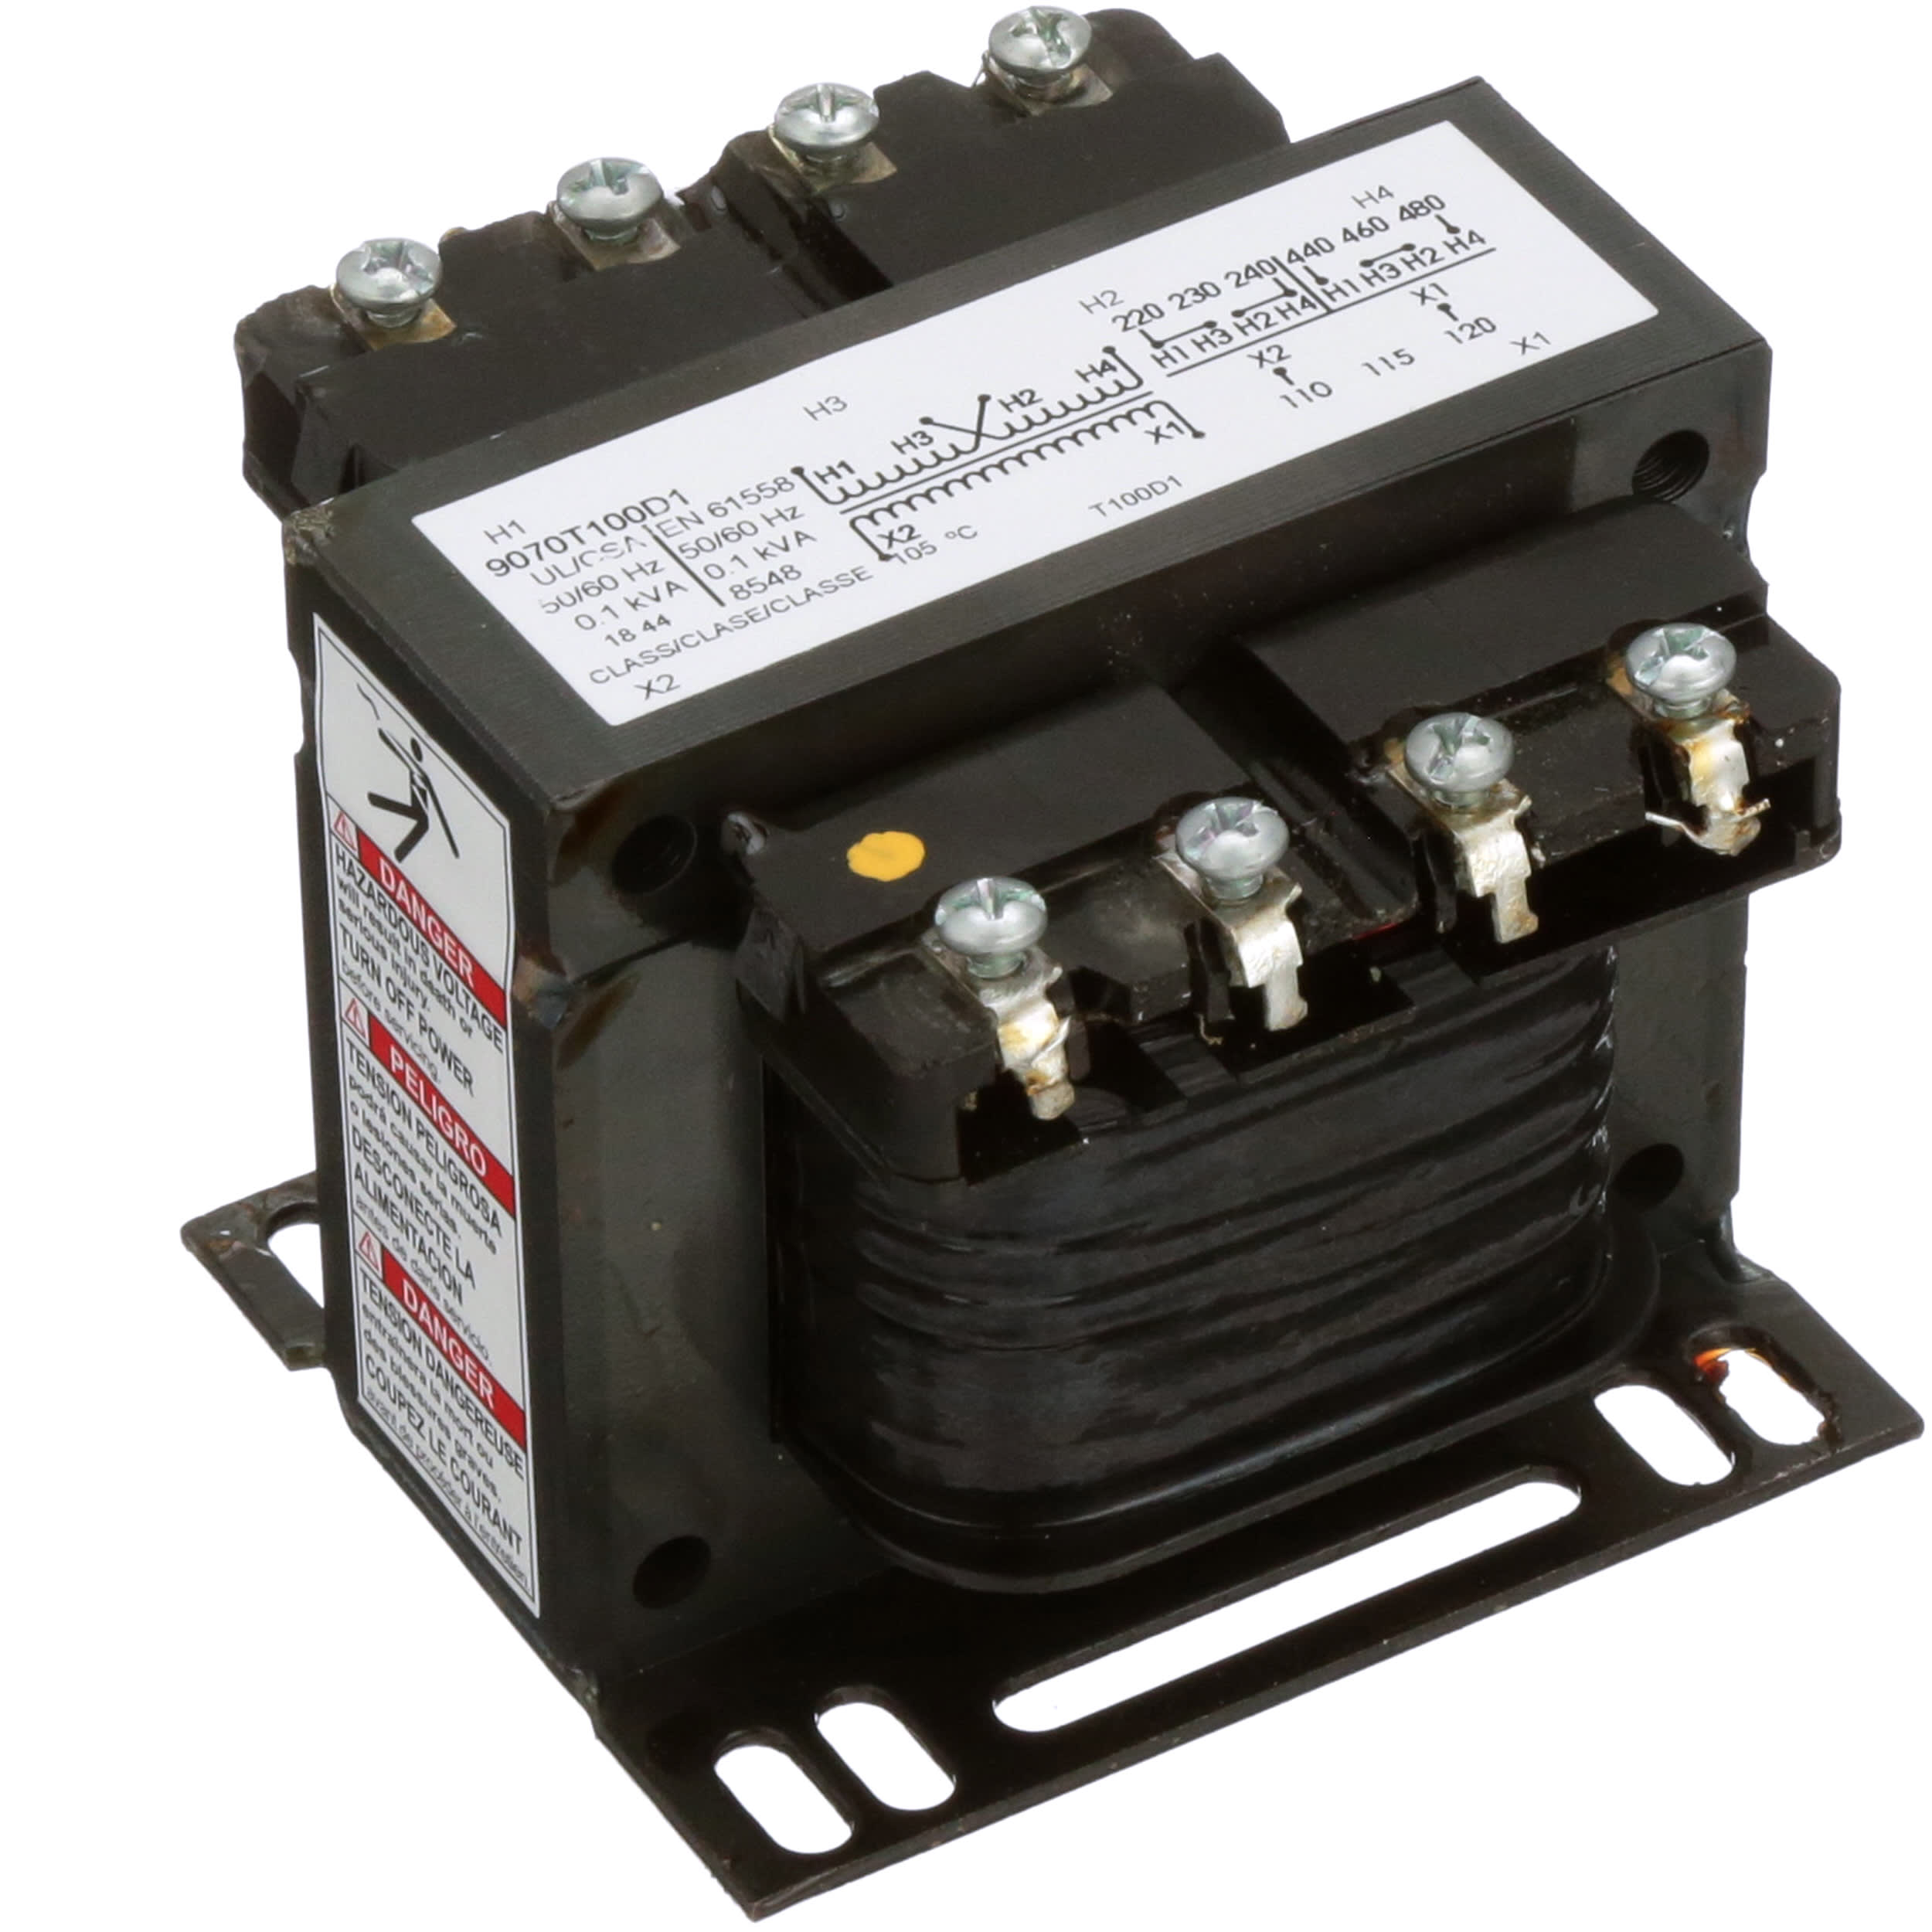 TRA4364 Details about   SQUARE D .01 KVA TRANSFORMER MODEL 9070TF100D1 